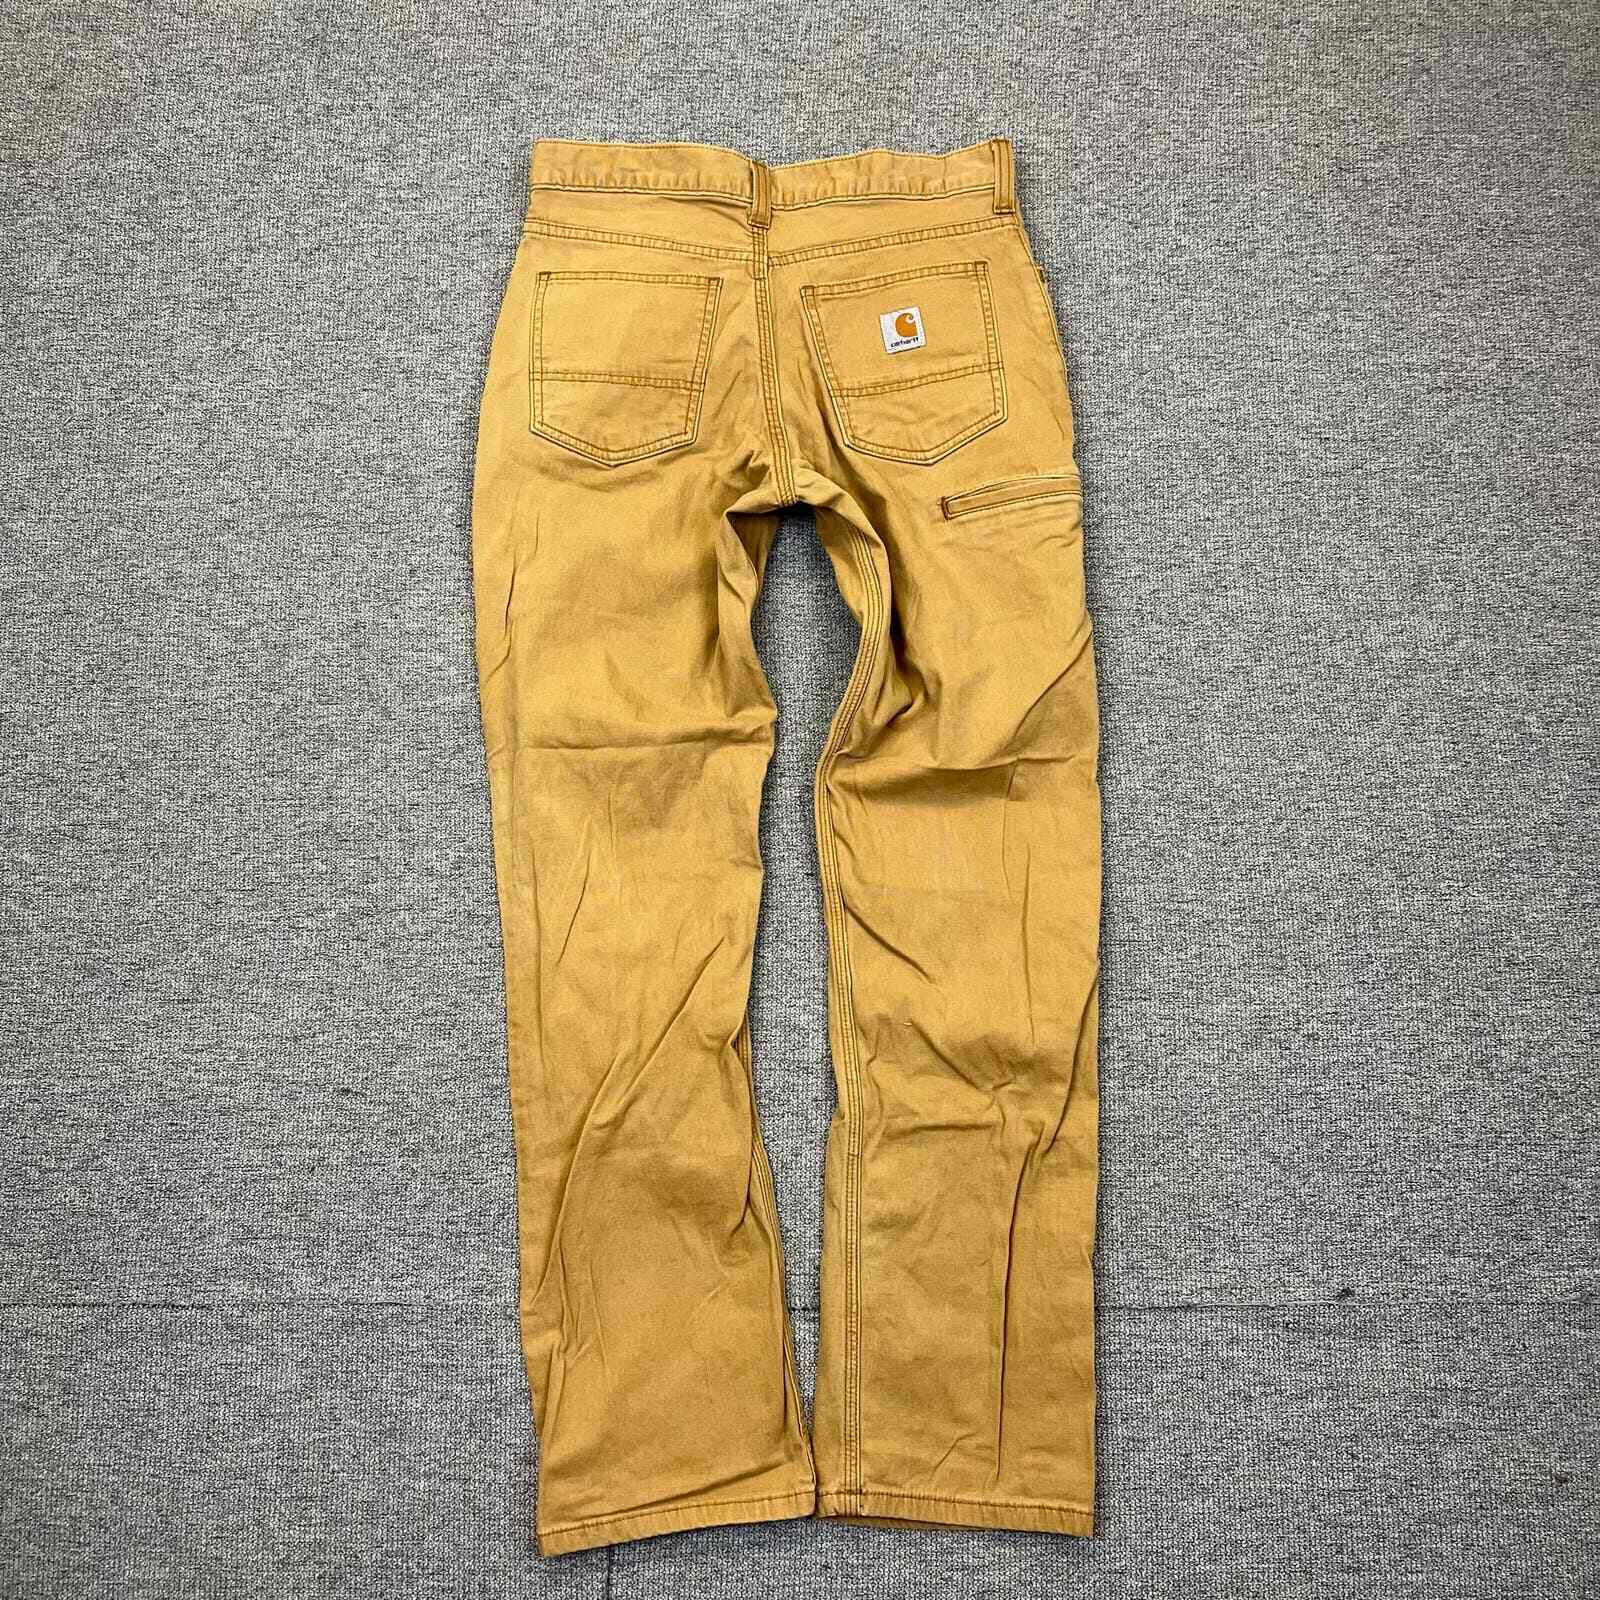 2000s 2010s Carhartt Relaxed Fit Tan Utility Pant… - image 2